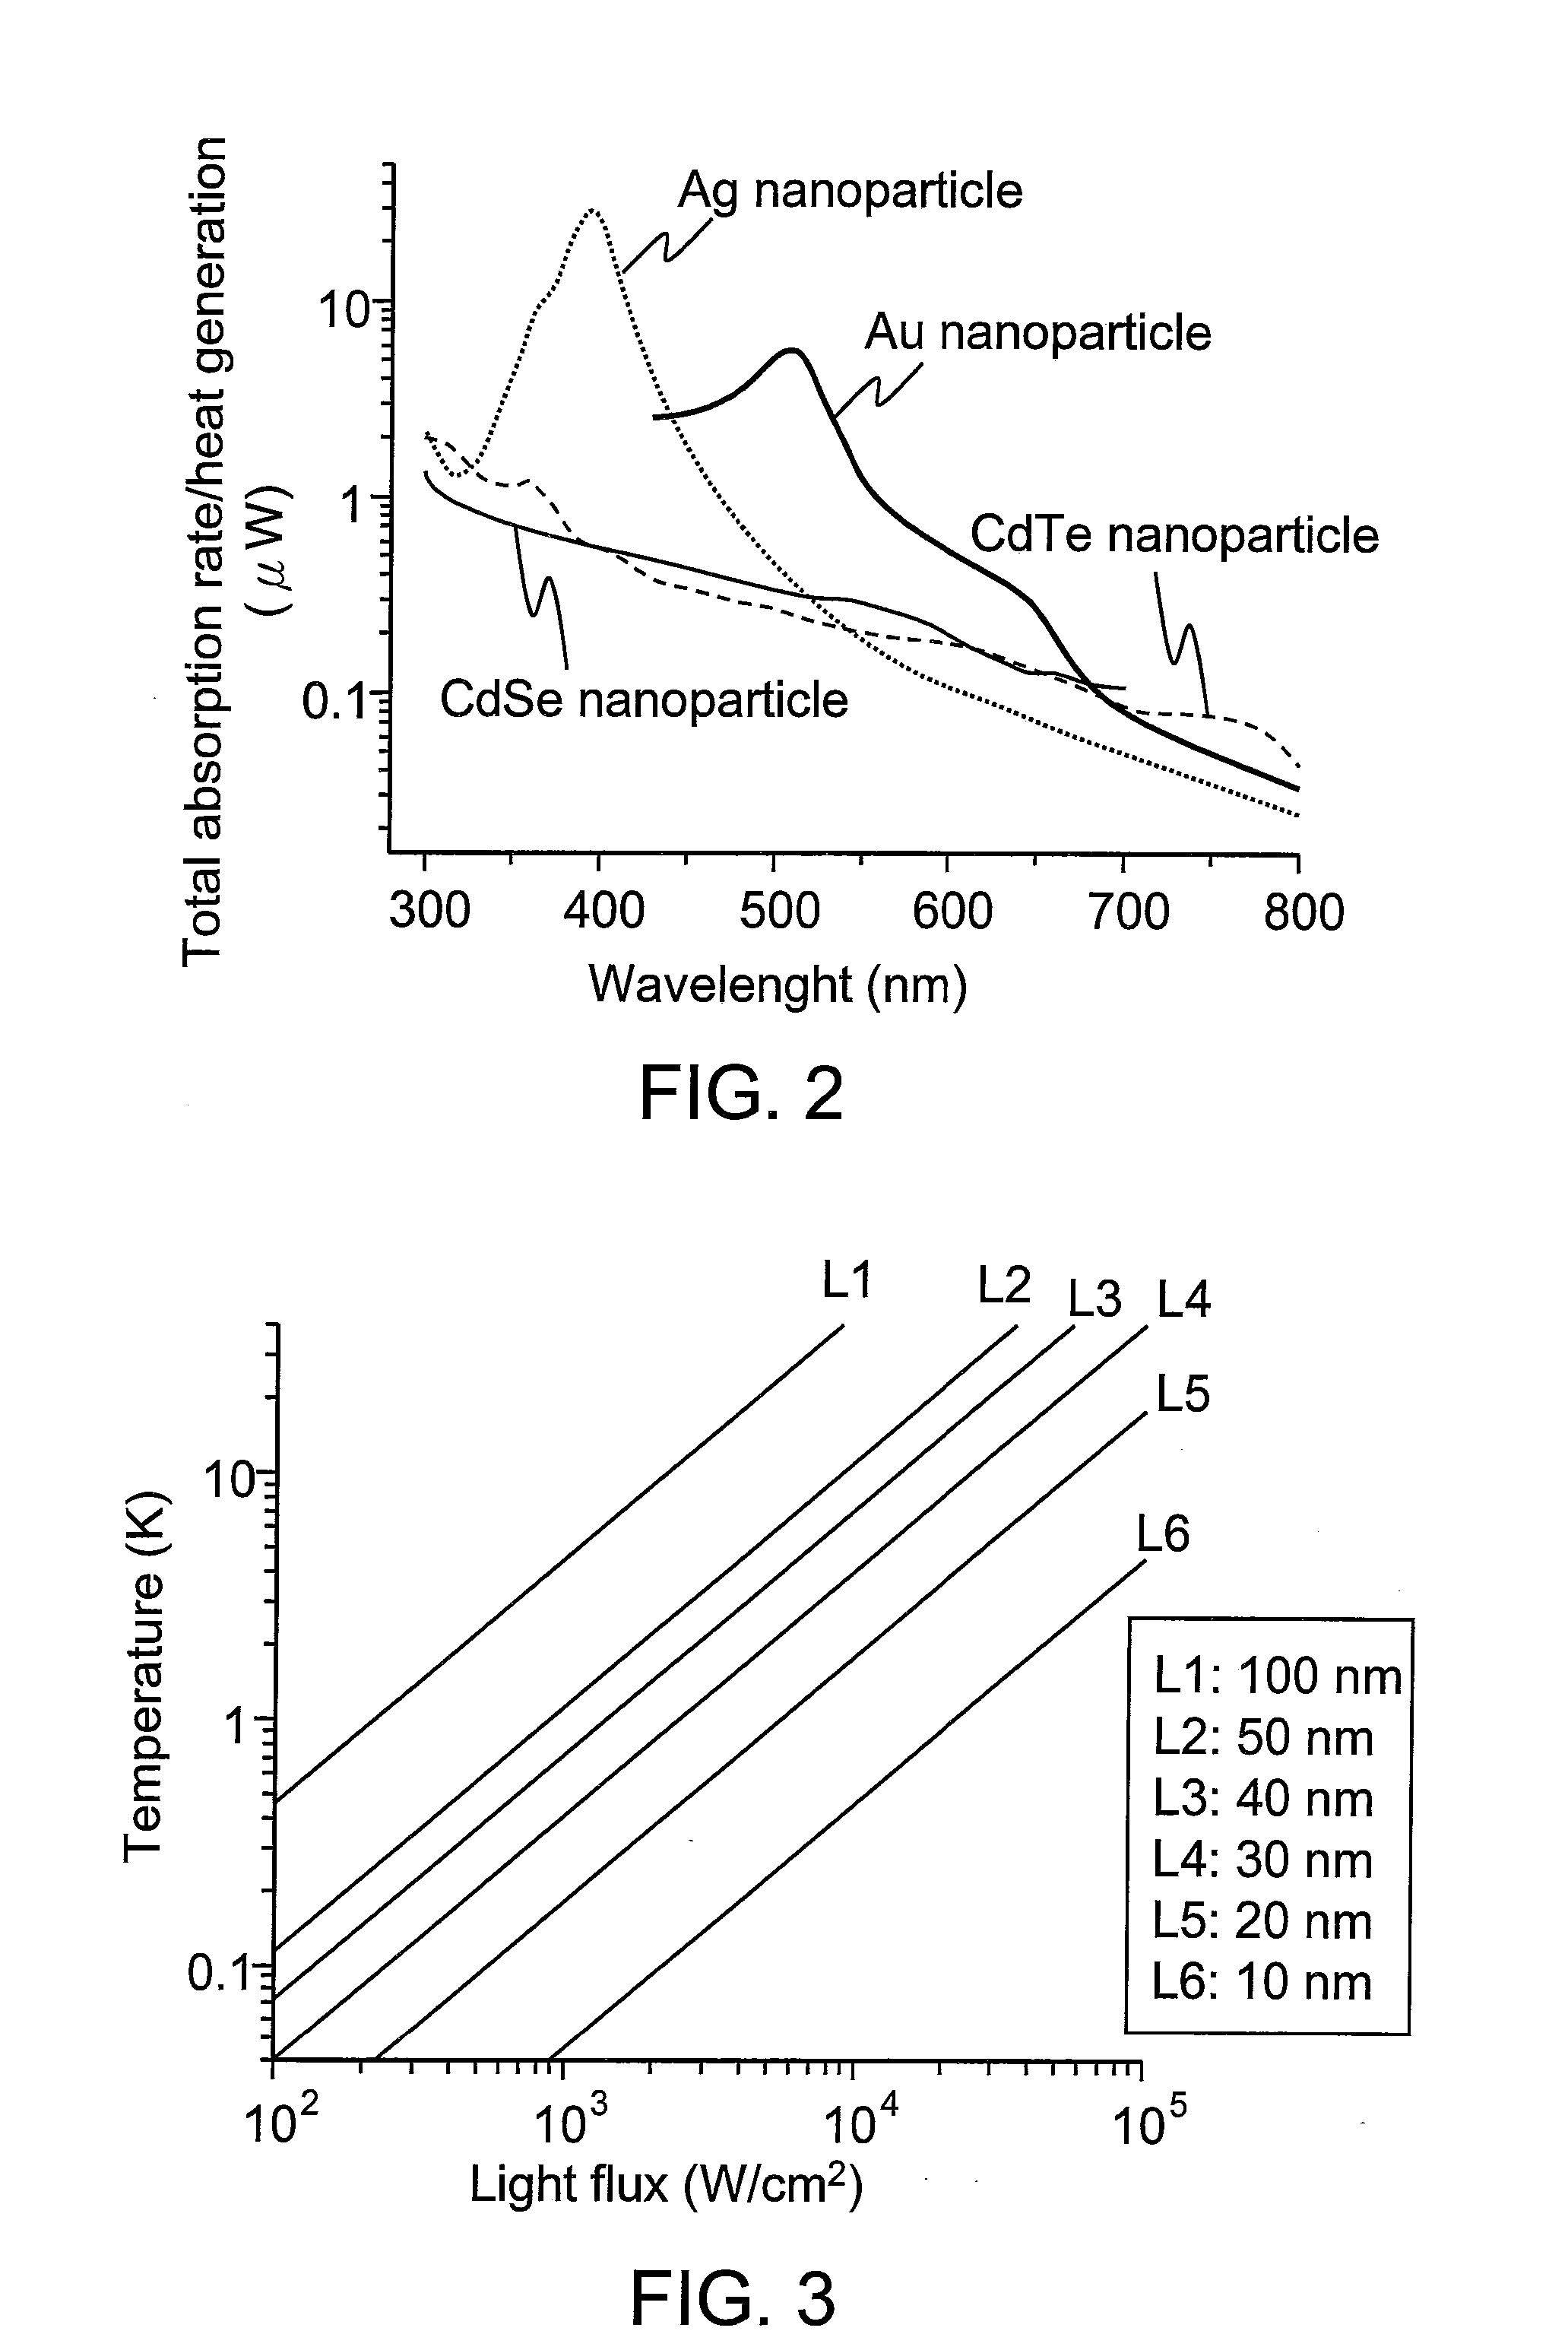 Method for manufacturing a substrate with surface structure by employing photothermal effect